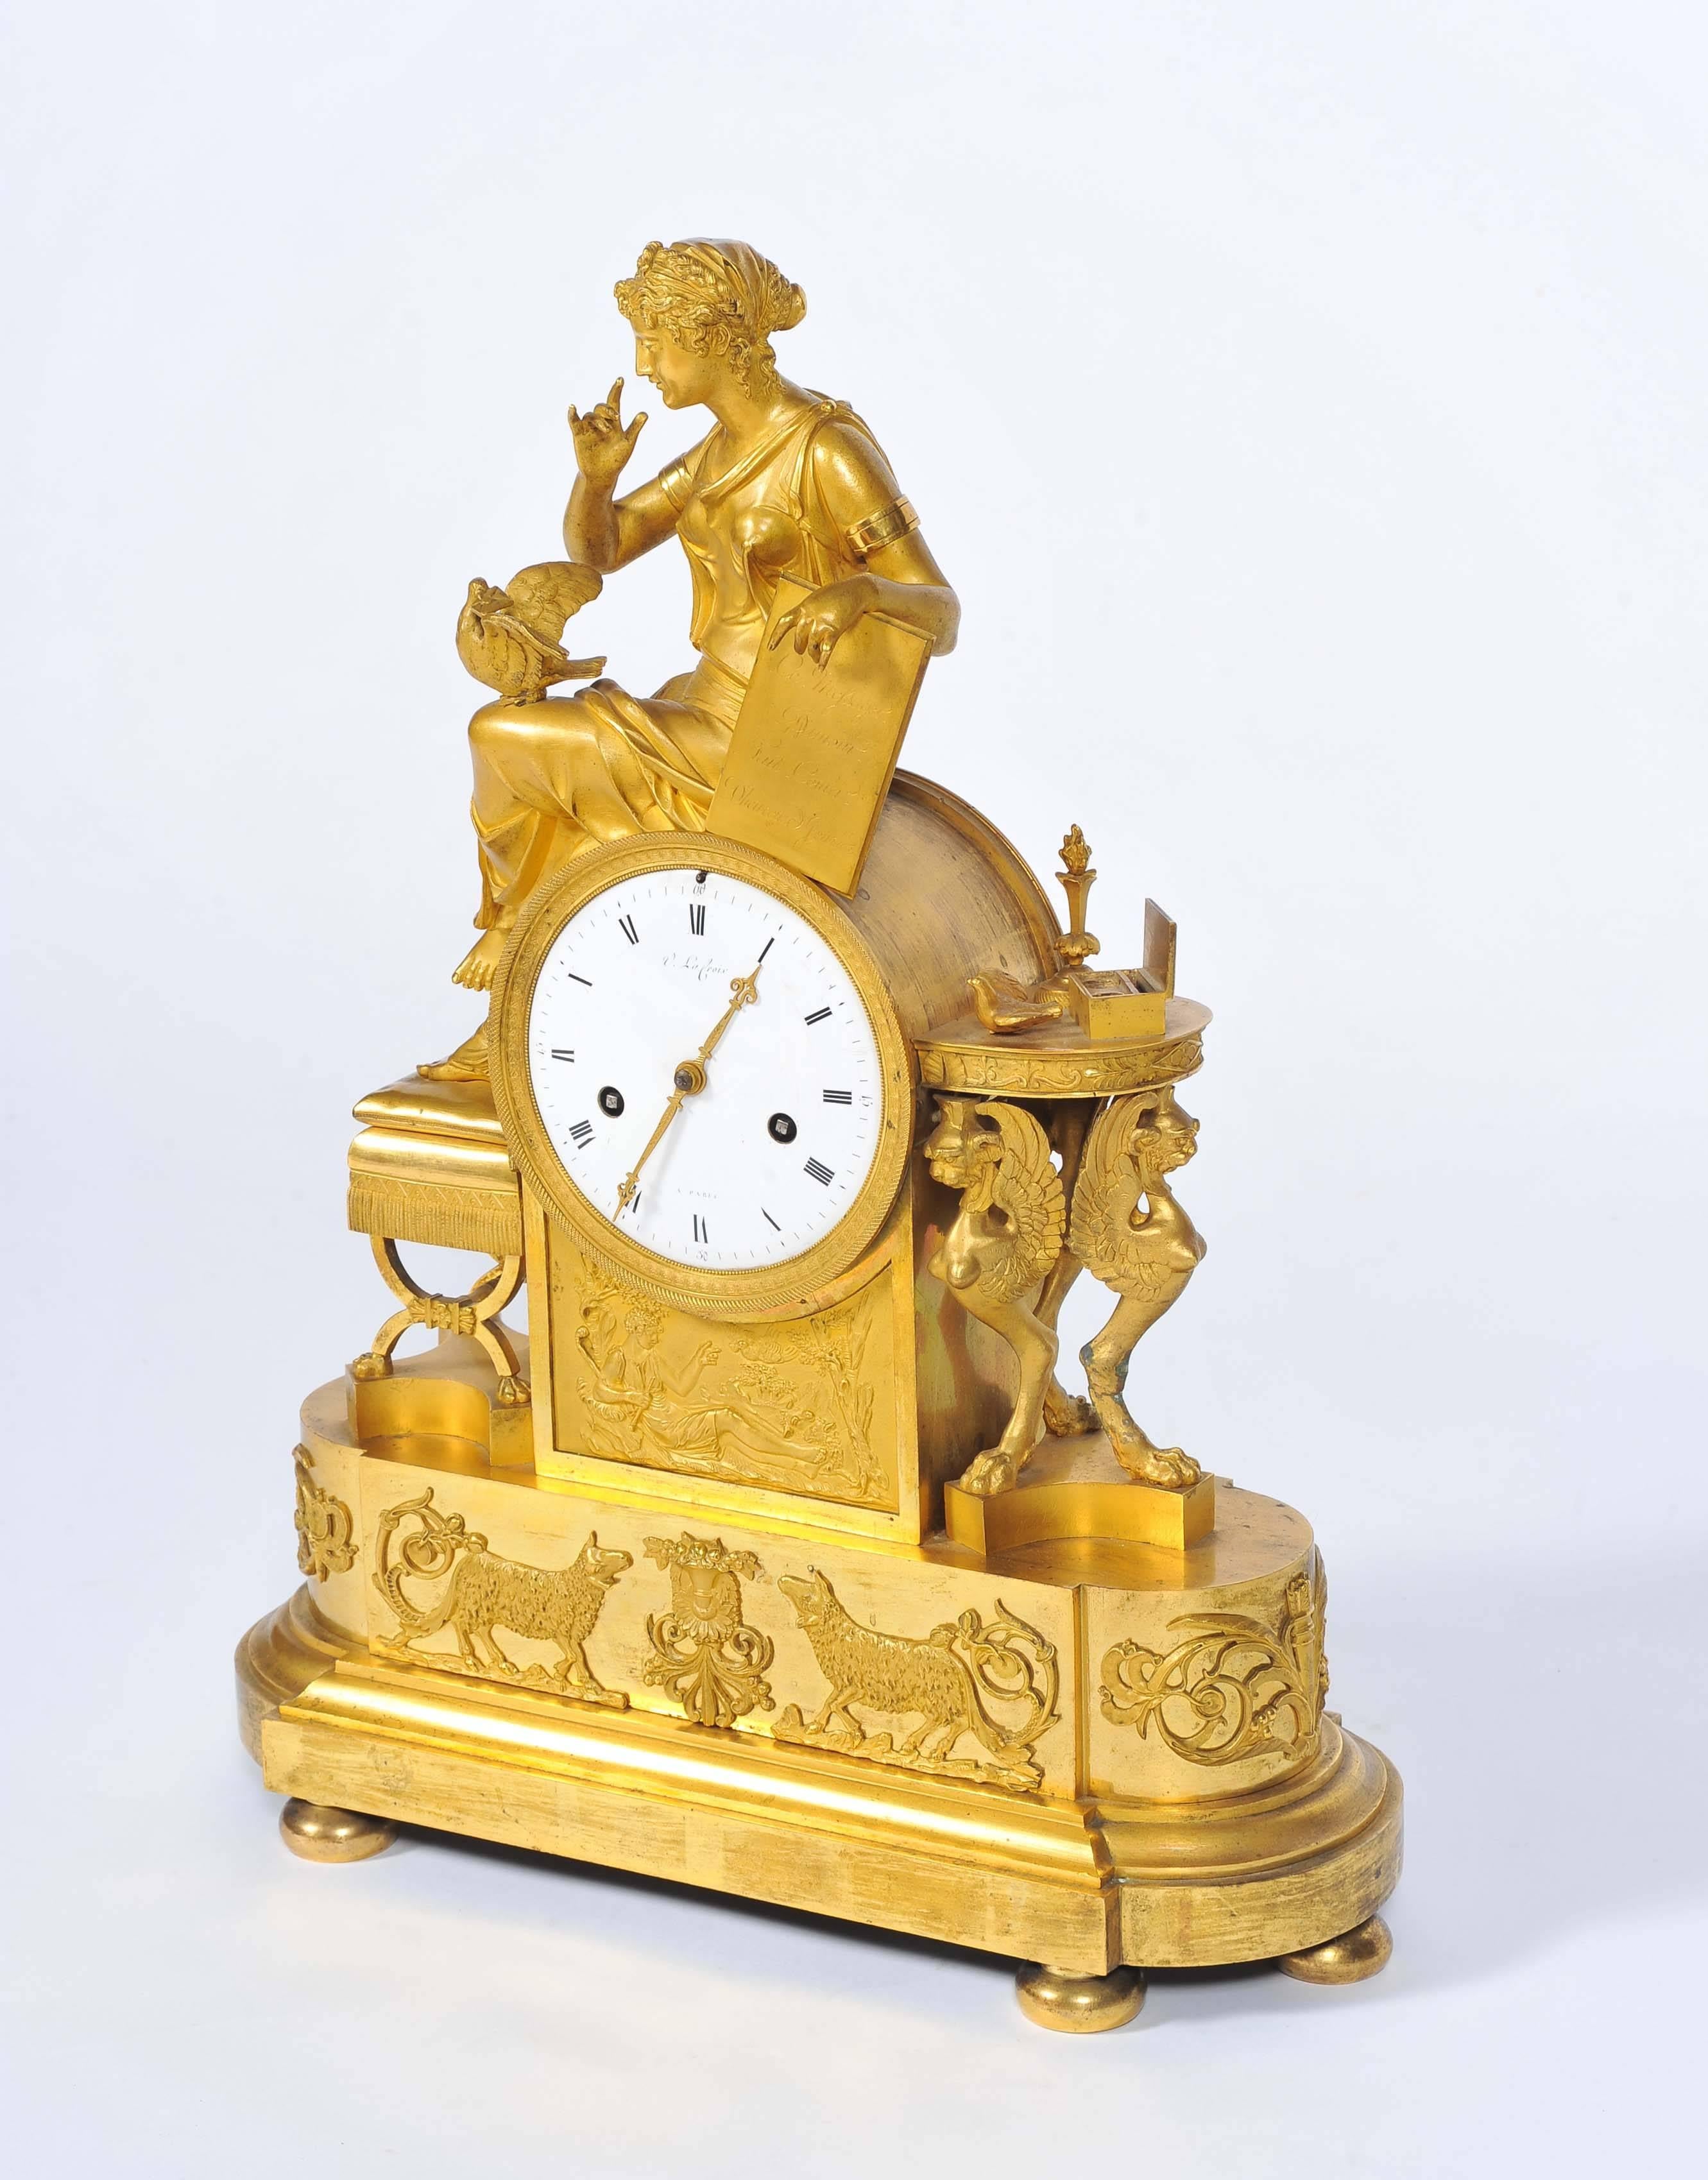 A very good quality French gilded ormolu mantel clock, depicting a classical female seated with her feet resting on a stool and a monopodia supported table. The eight-day chiming movement having an enamel dial.
Signed; LaCroix, Paris.